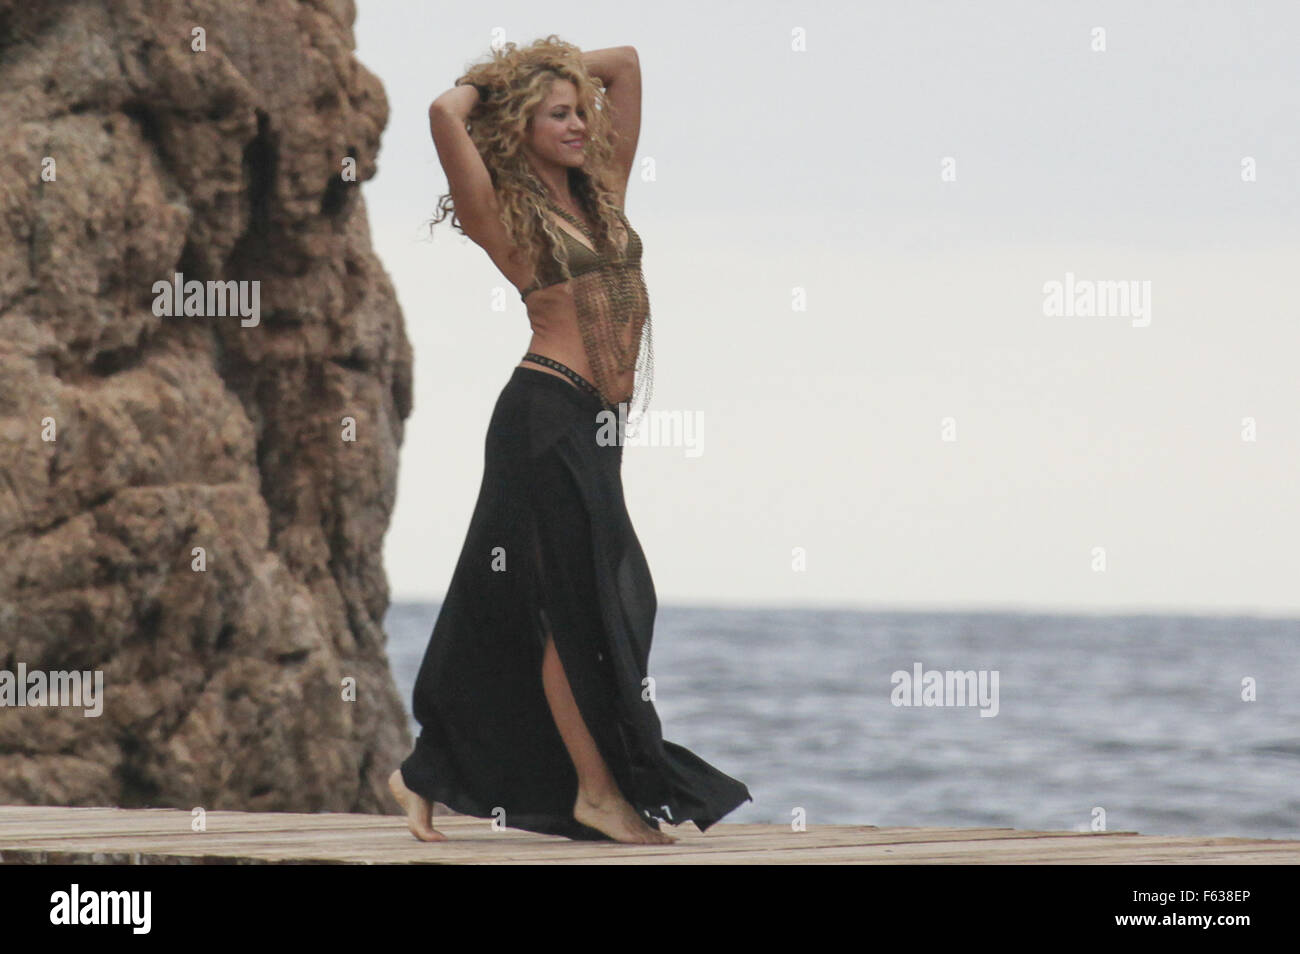 Shakira films a commercial in Tossa de Mar, Spain. The singer wears a  bikini top and a skirt with slits and is seen playing with her eldest son  Milan while taking a